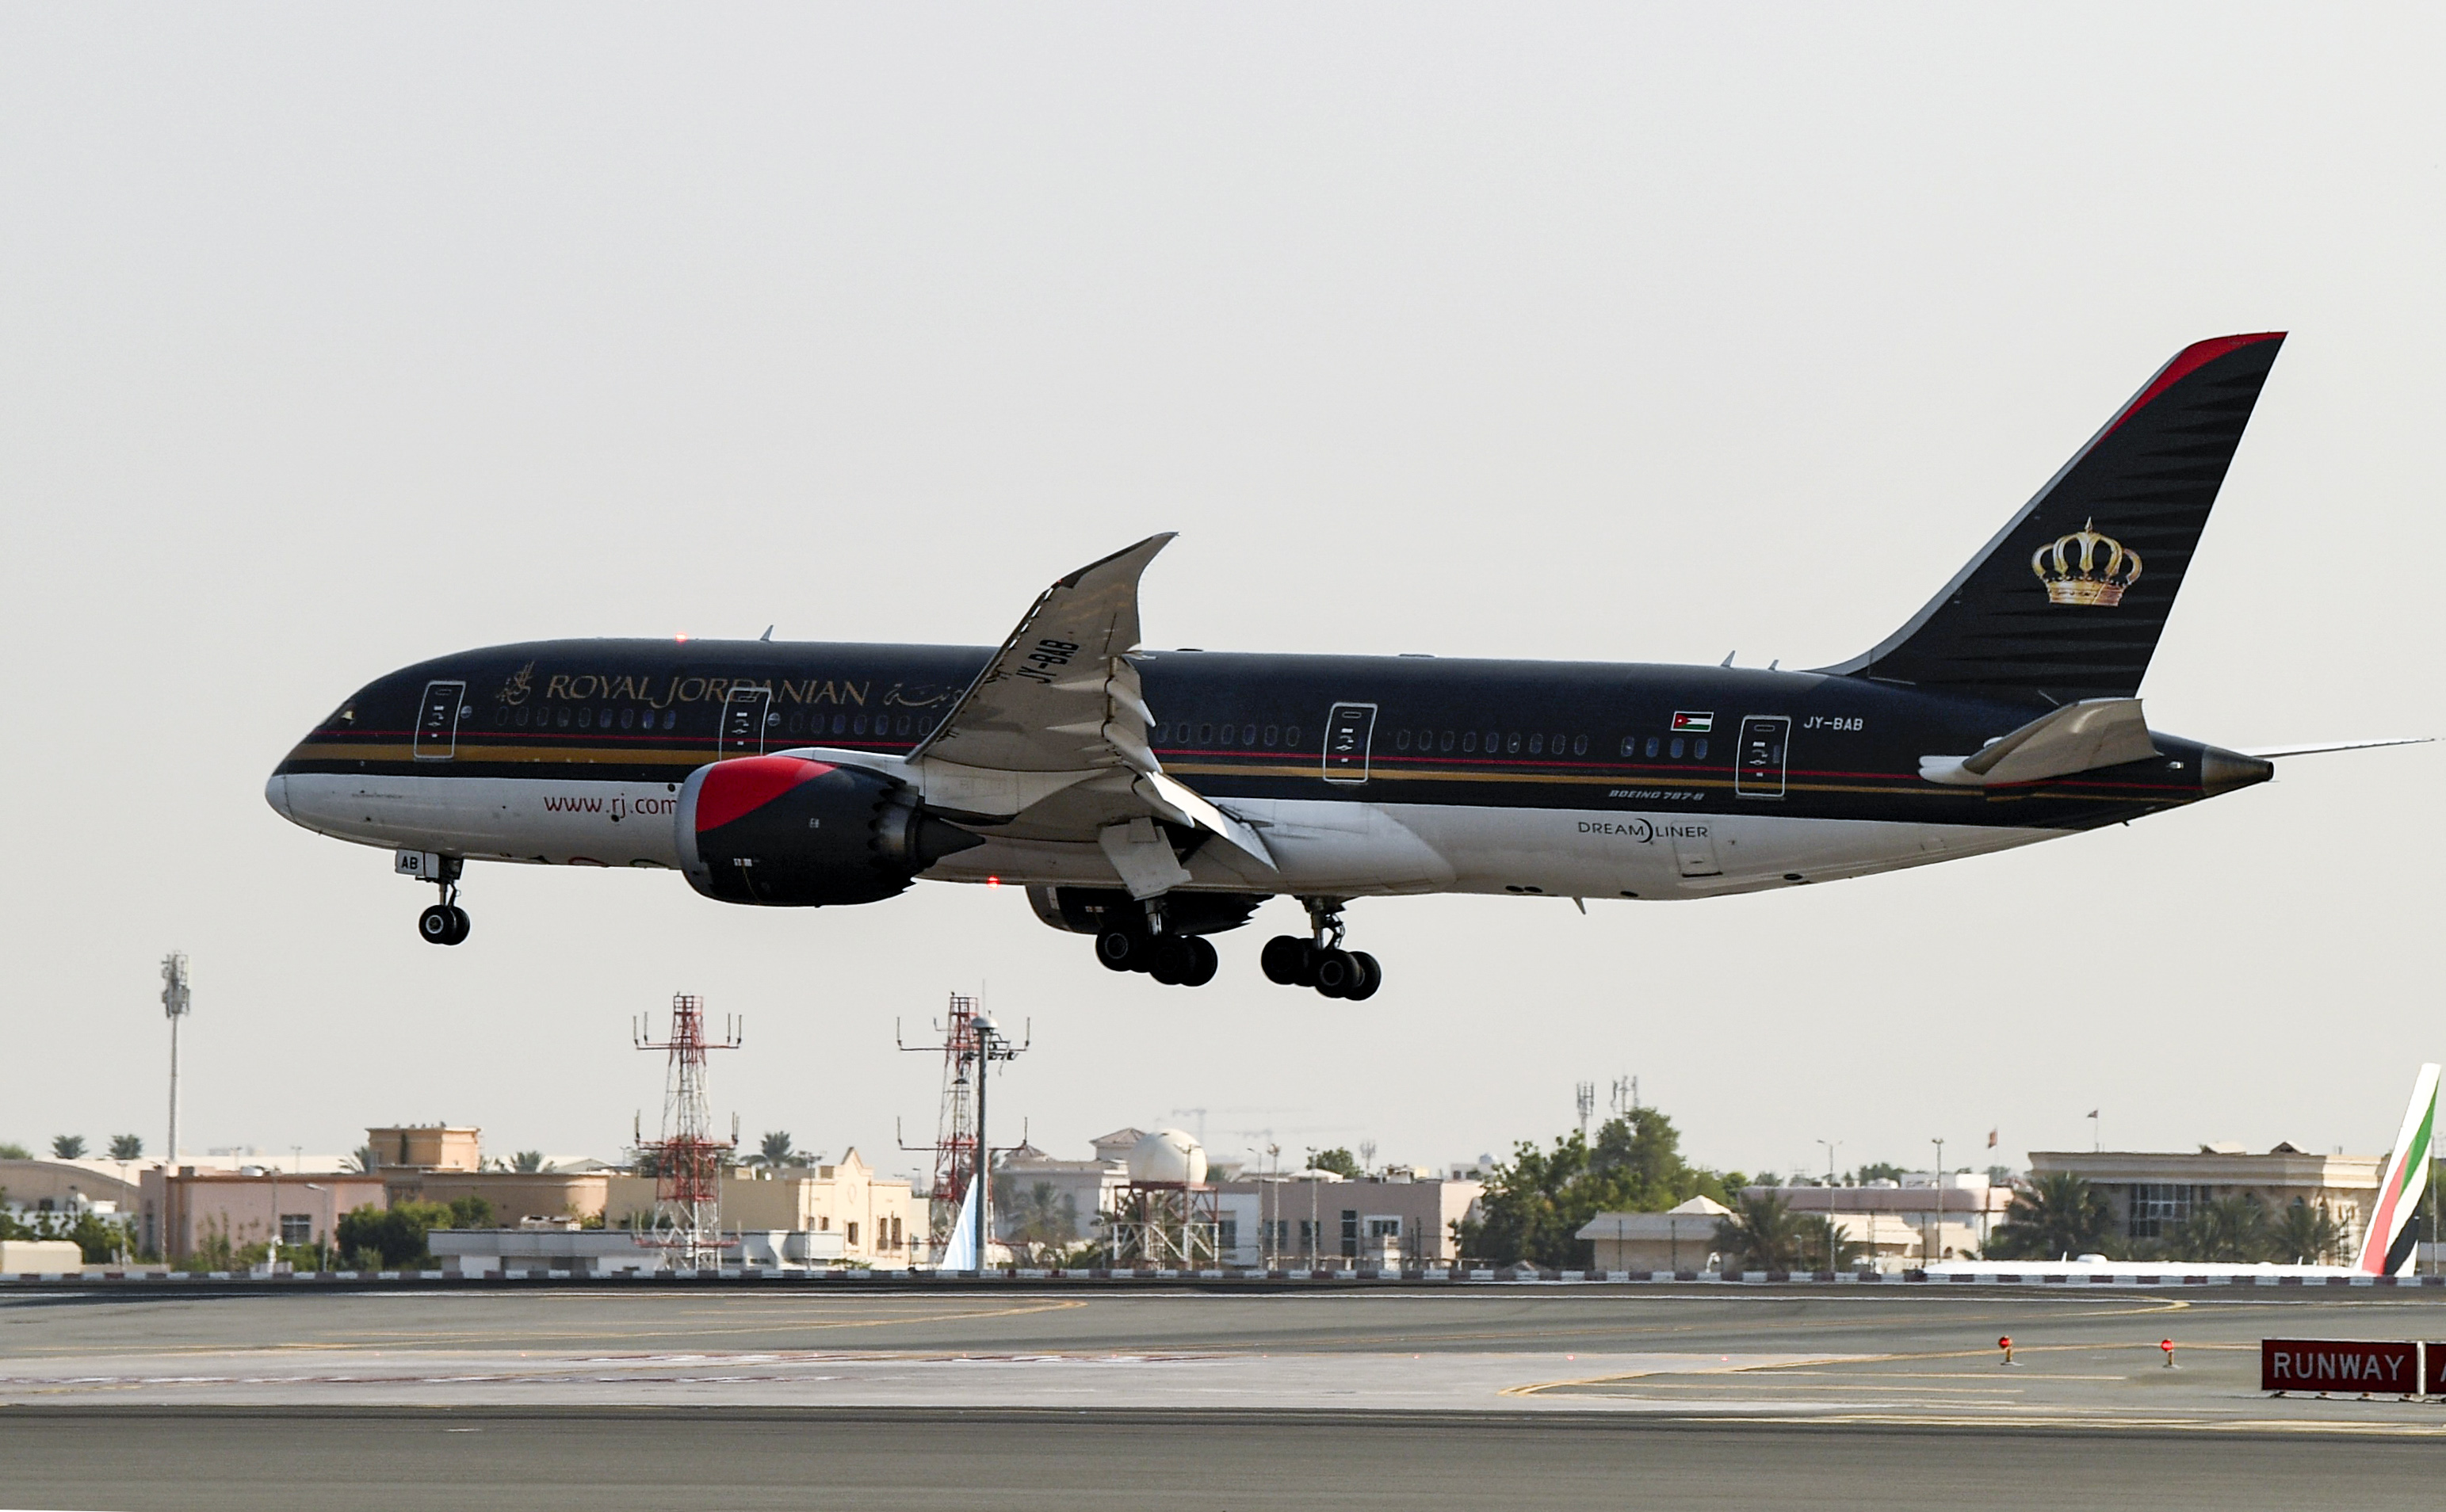 how is royal jordanian airlines